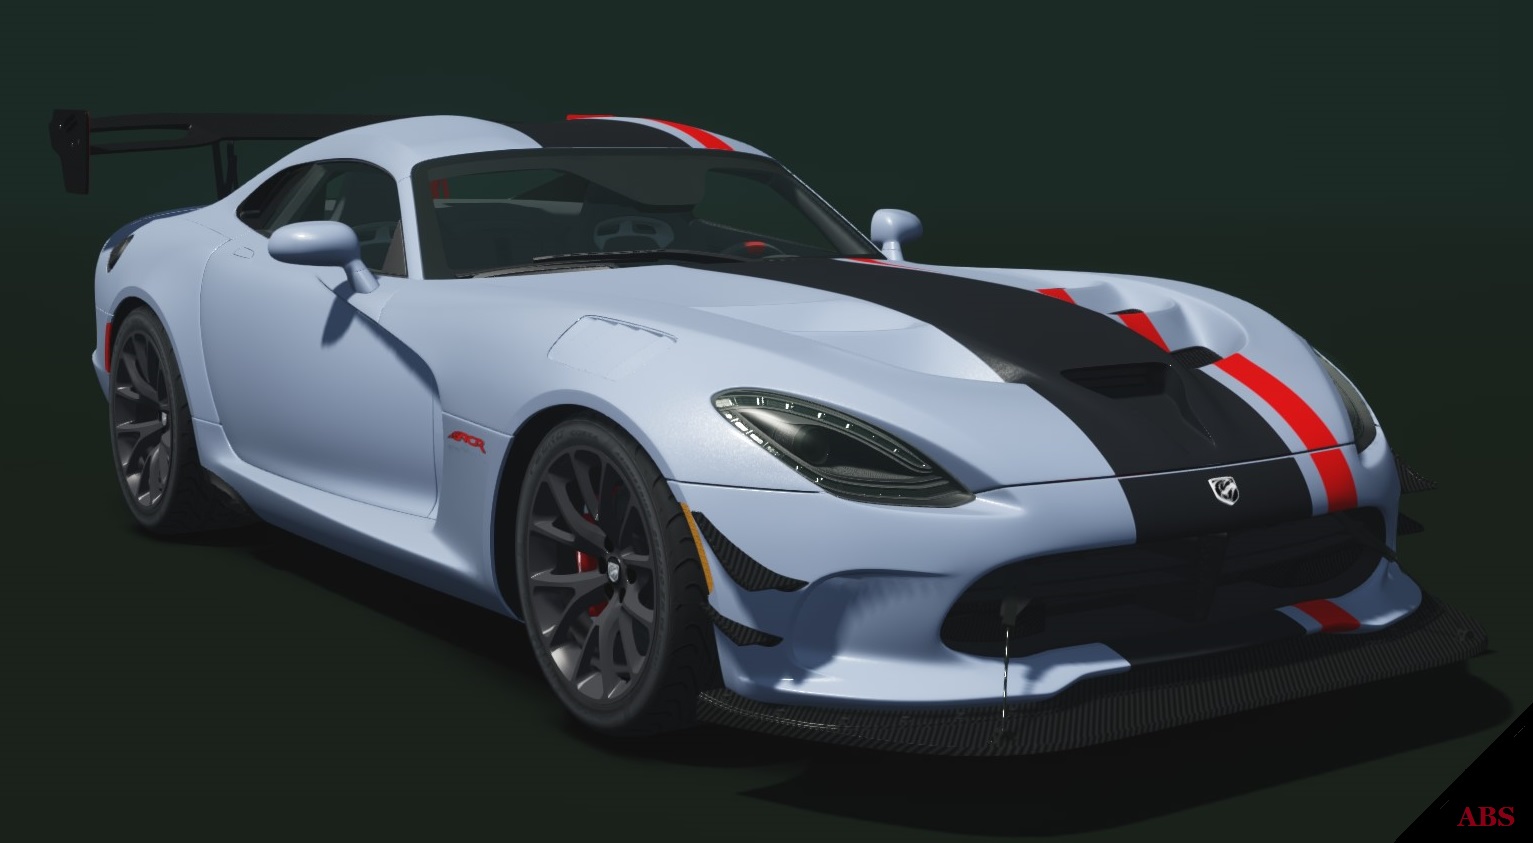 Specification Product Dodge Viper ACR White ABS 2016 Abah